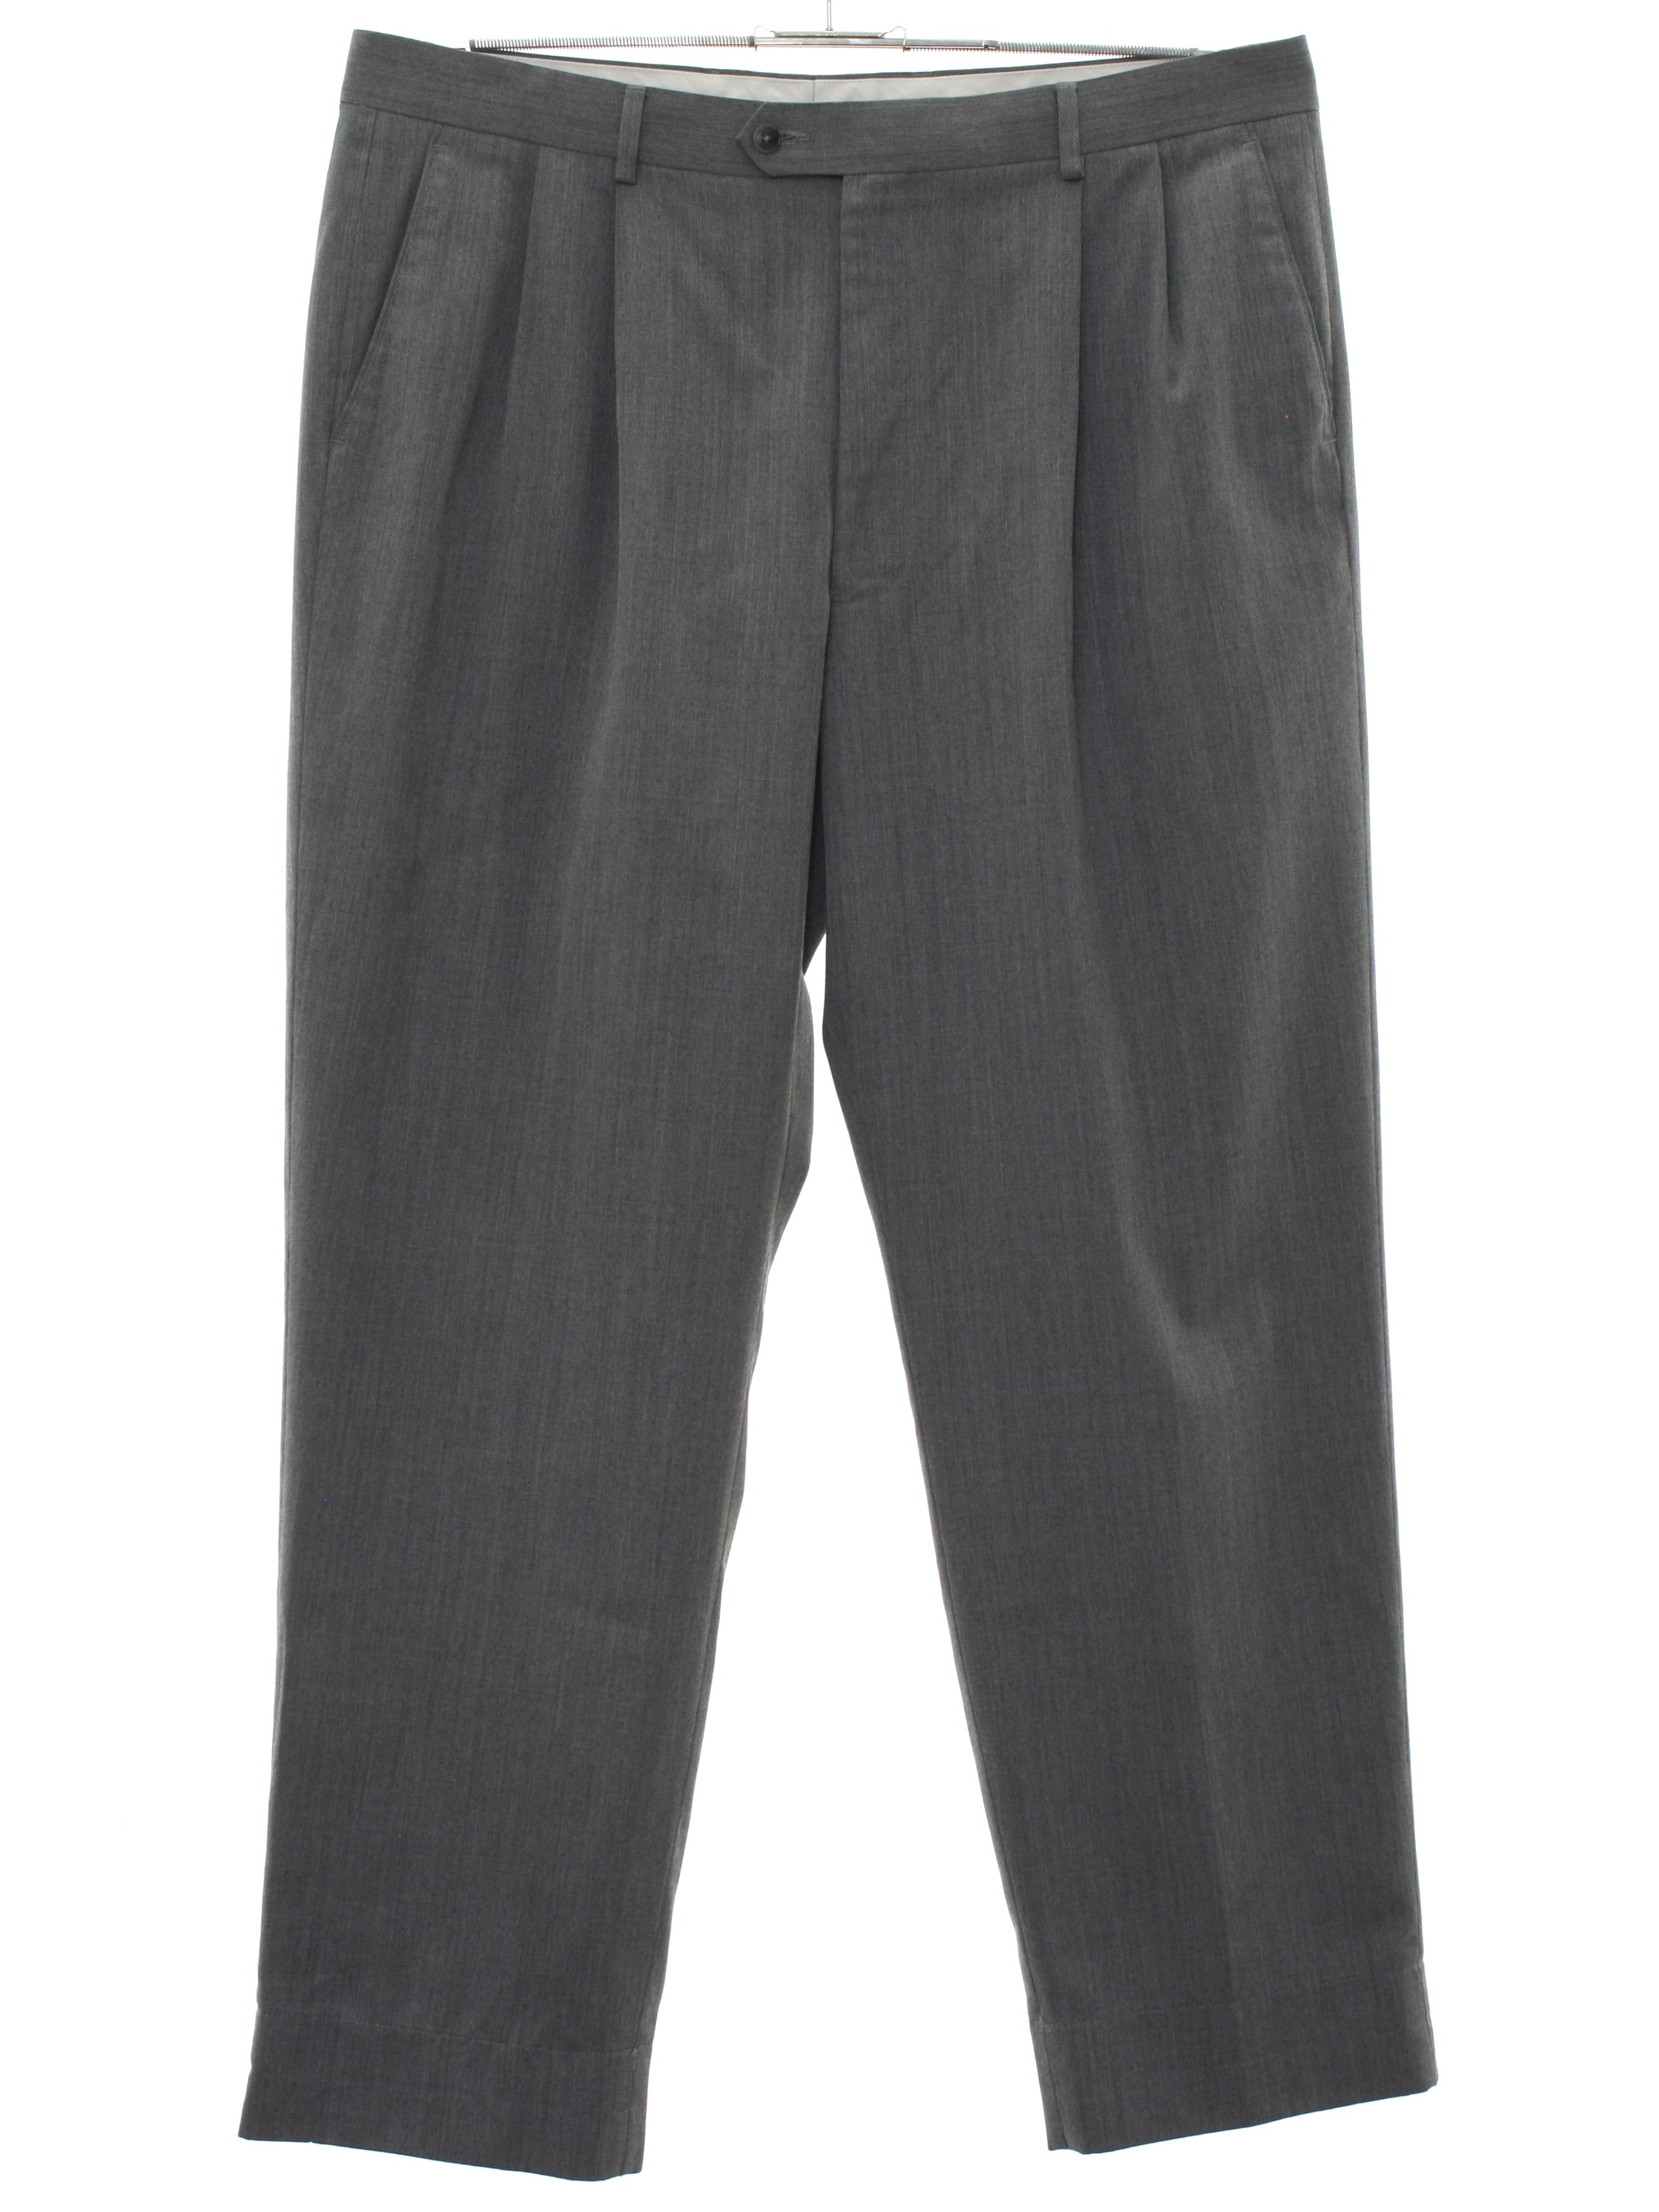 80's Joseph and Feiss Pants: 80s -Joseph and Feiss- Mens gray heather ...